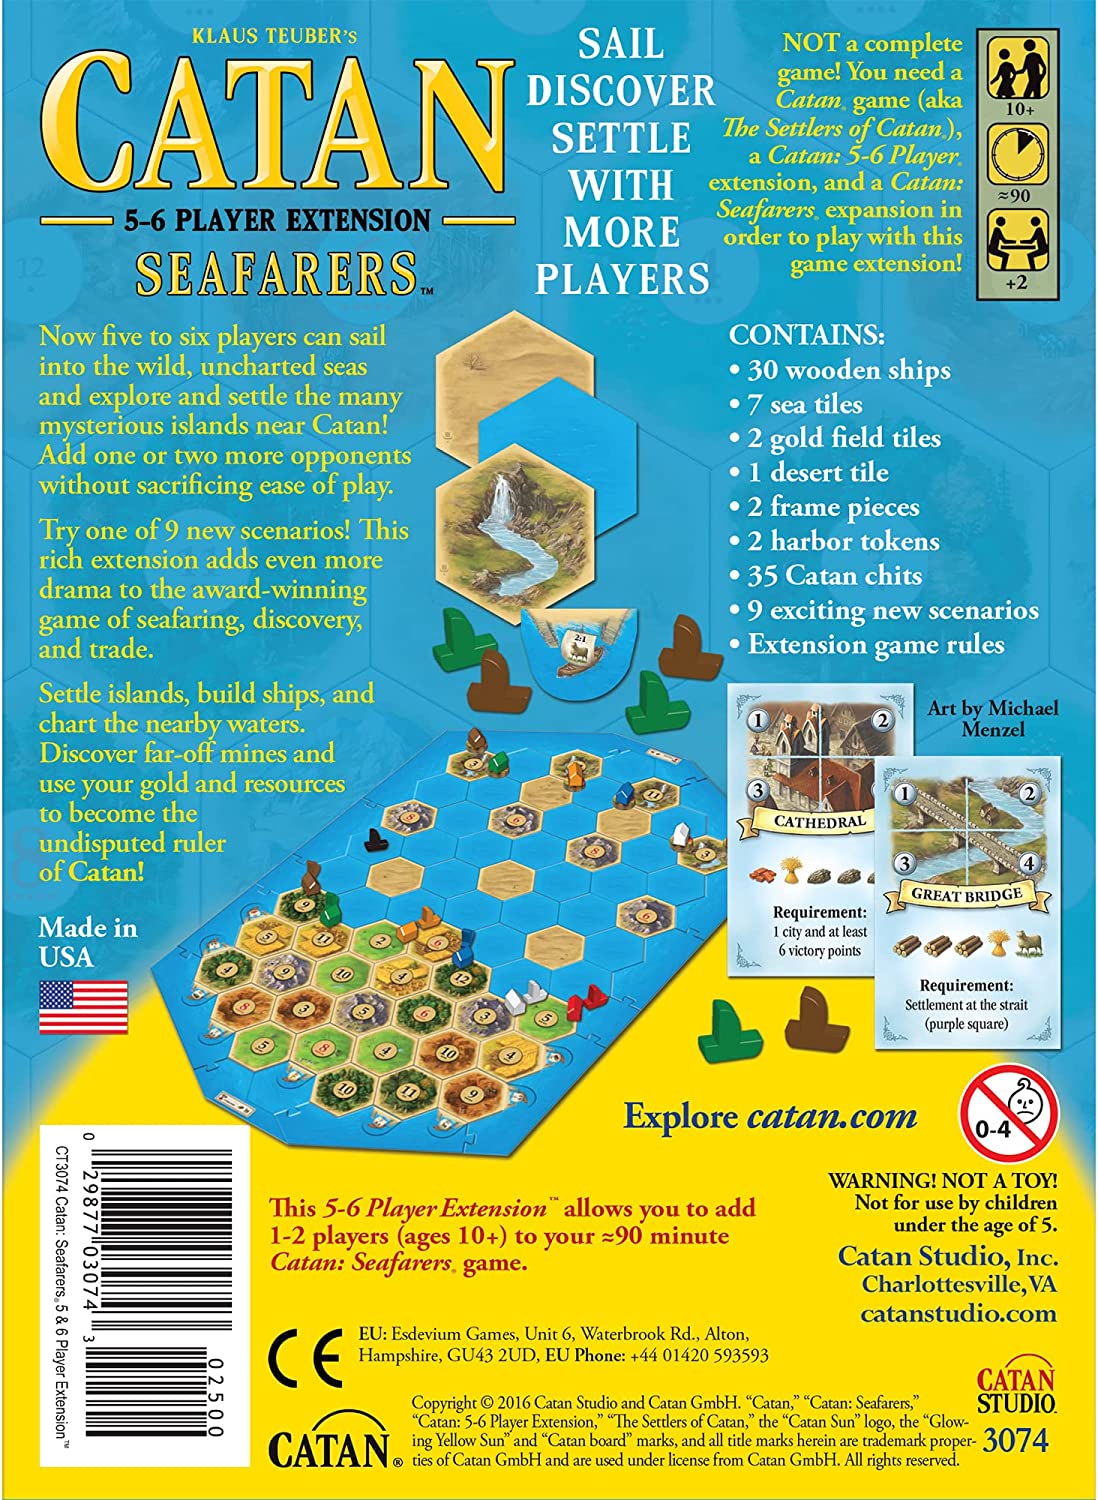 Catan: Seafarers 5-6 Player Extension (Expansion for Catan, 5th Edition) back of box